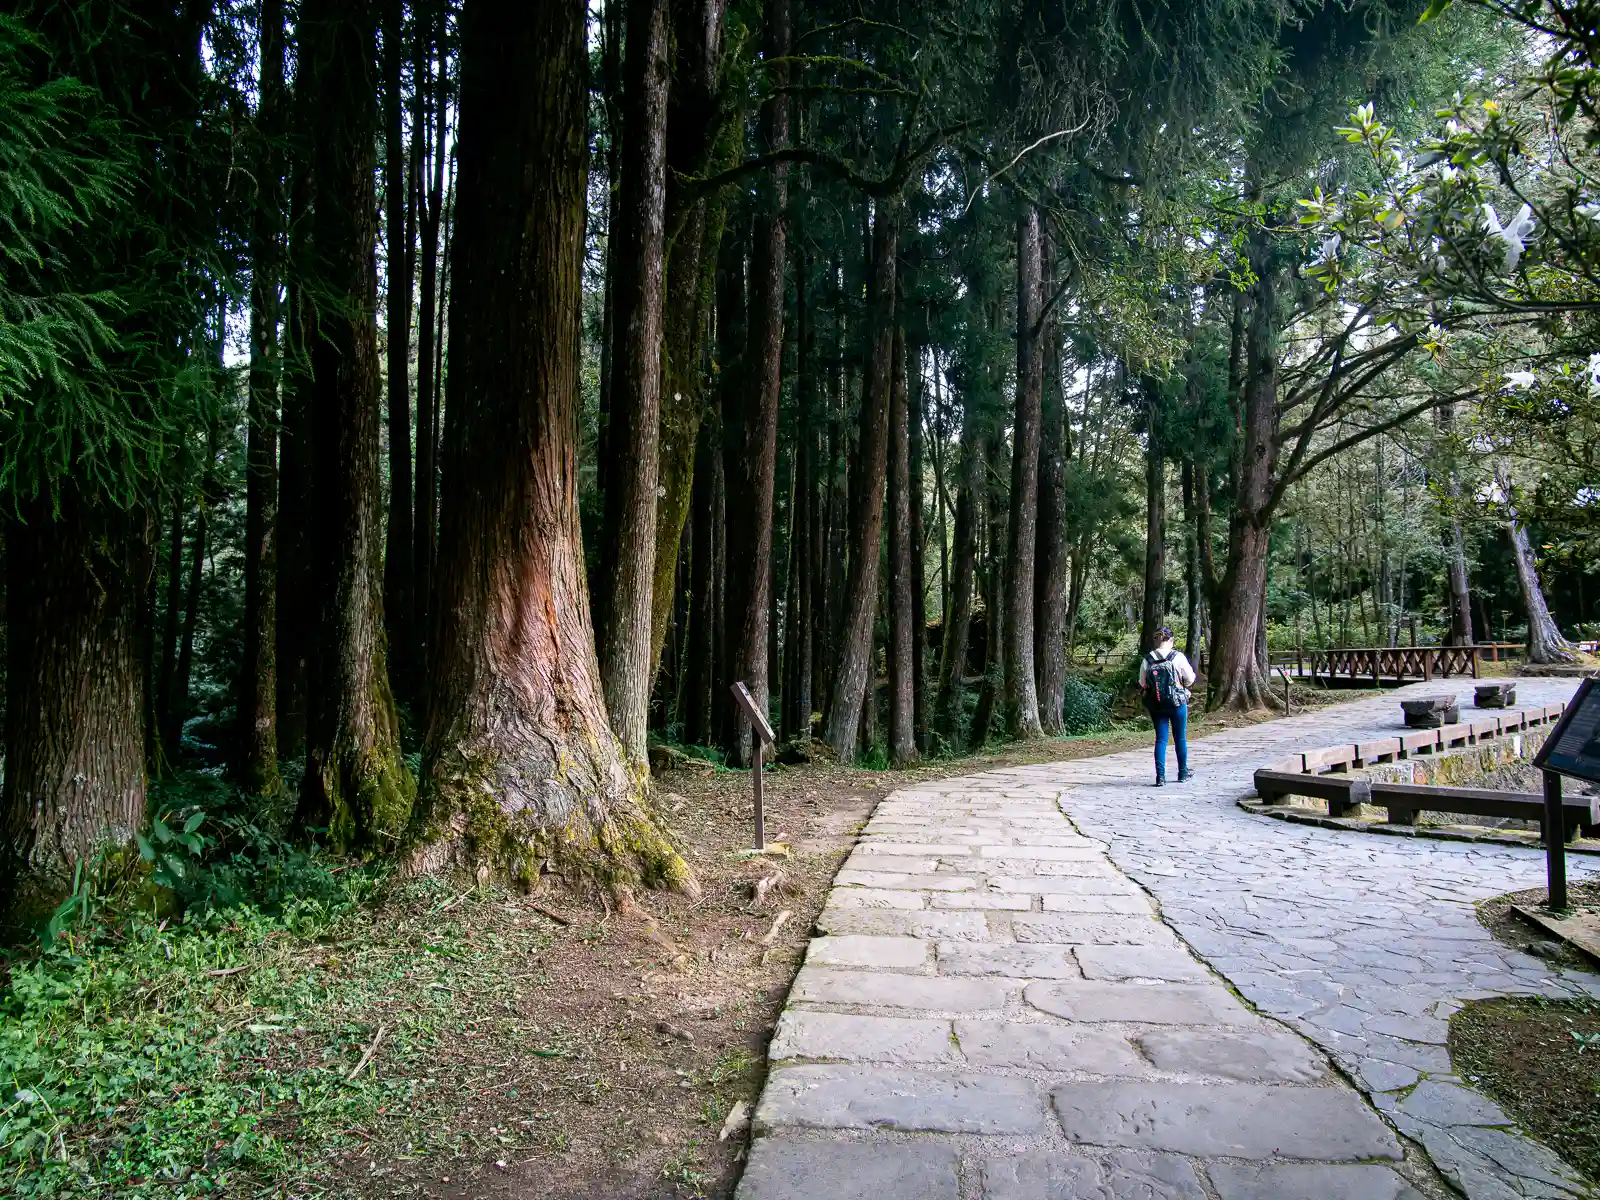 A rest area with benches is visible facing the forest.